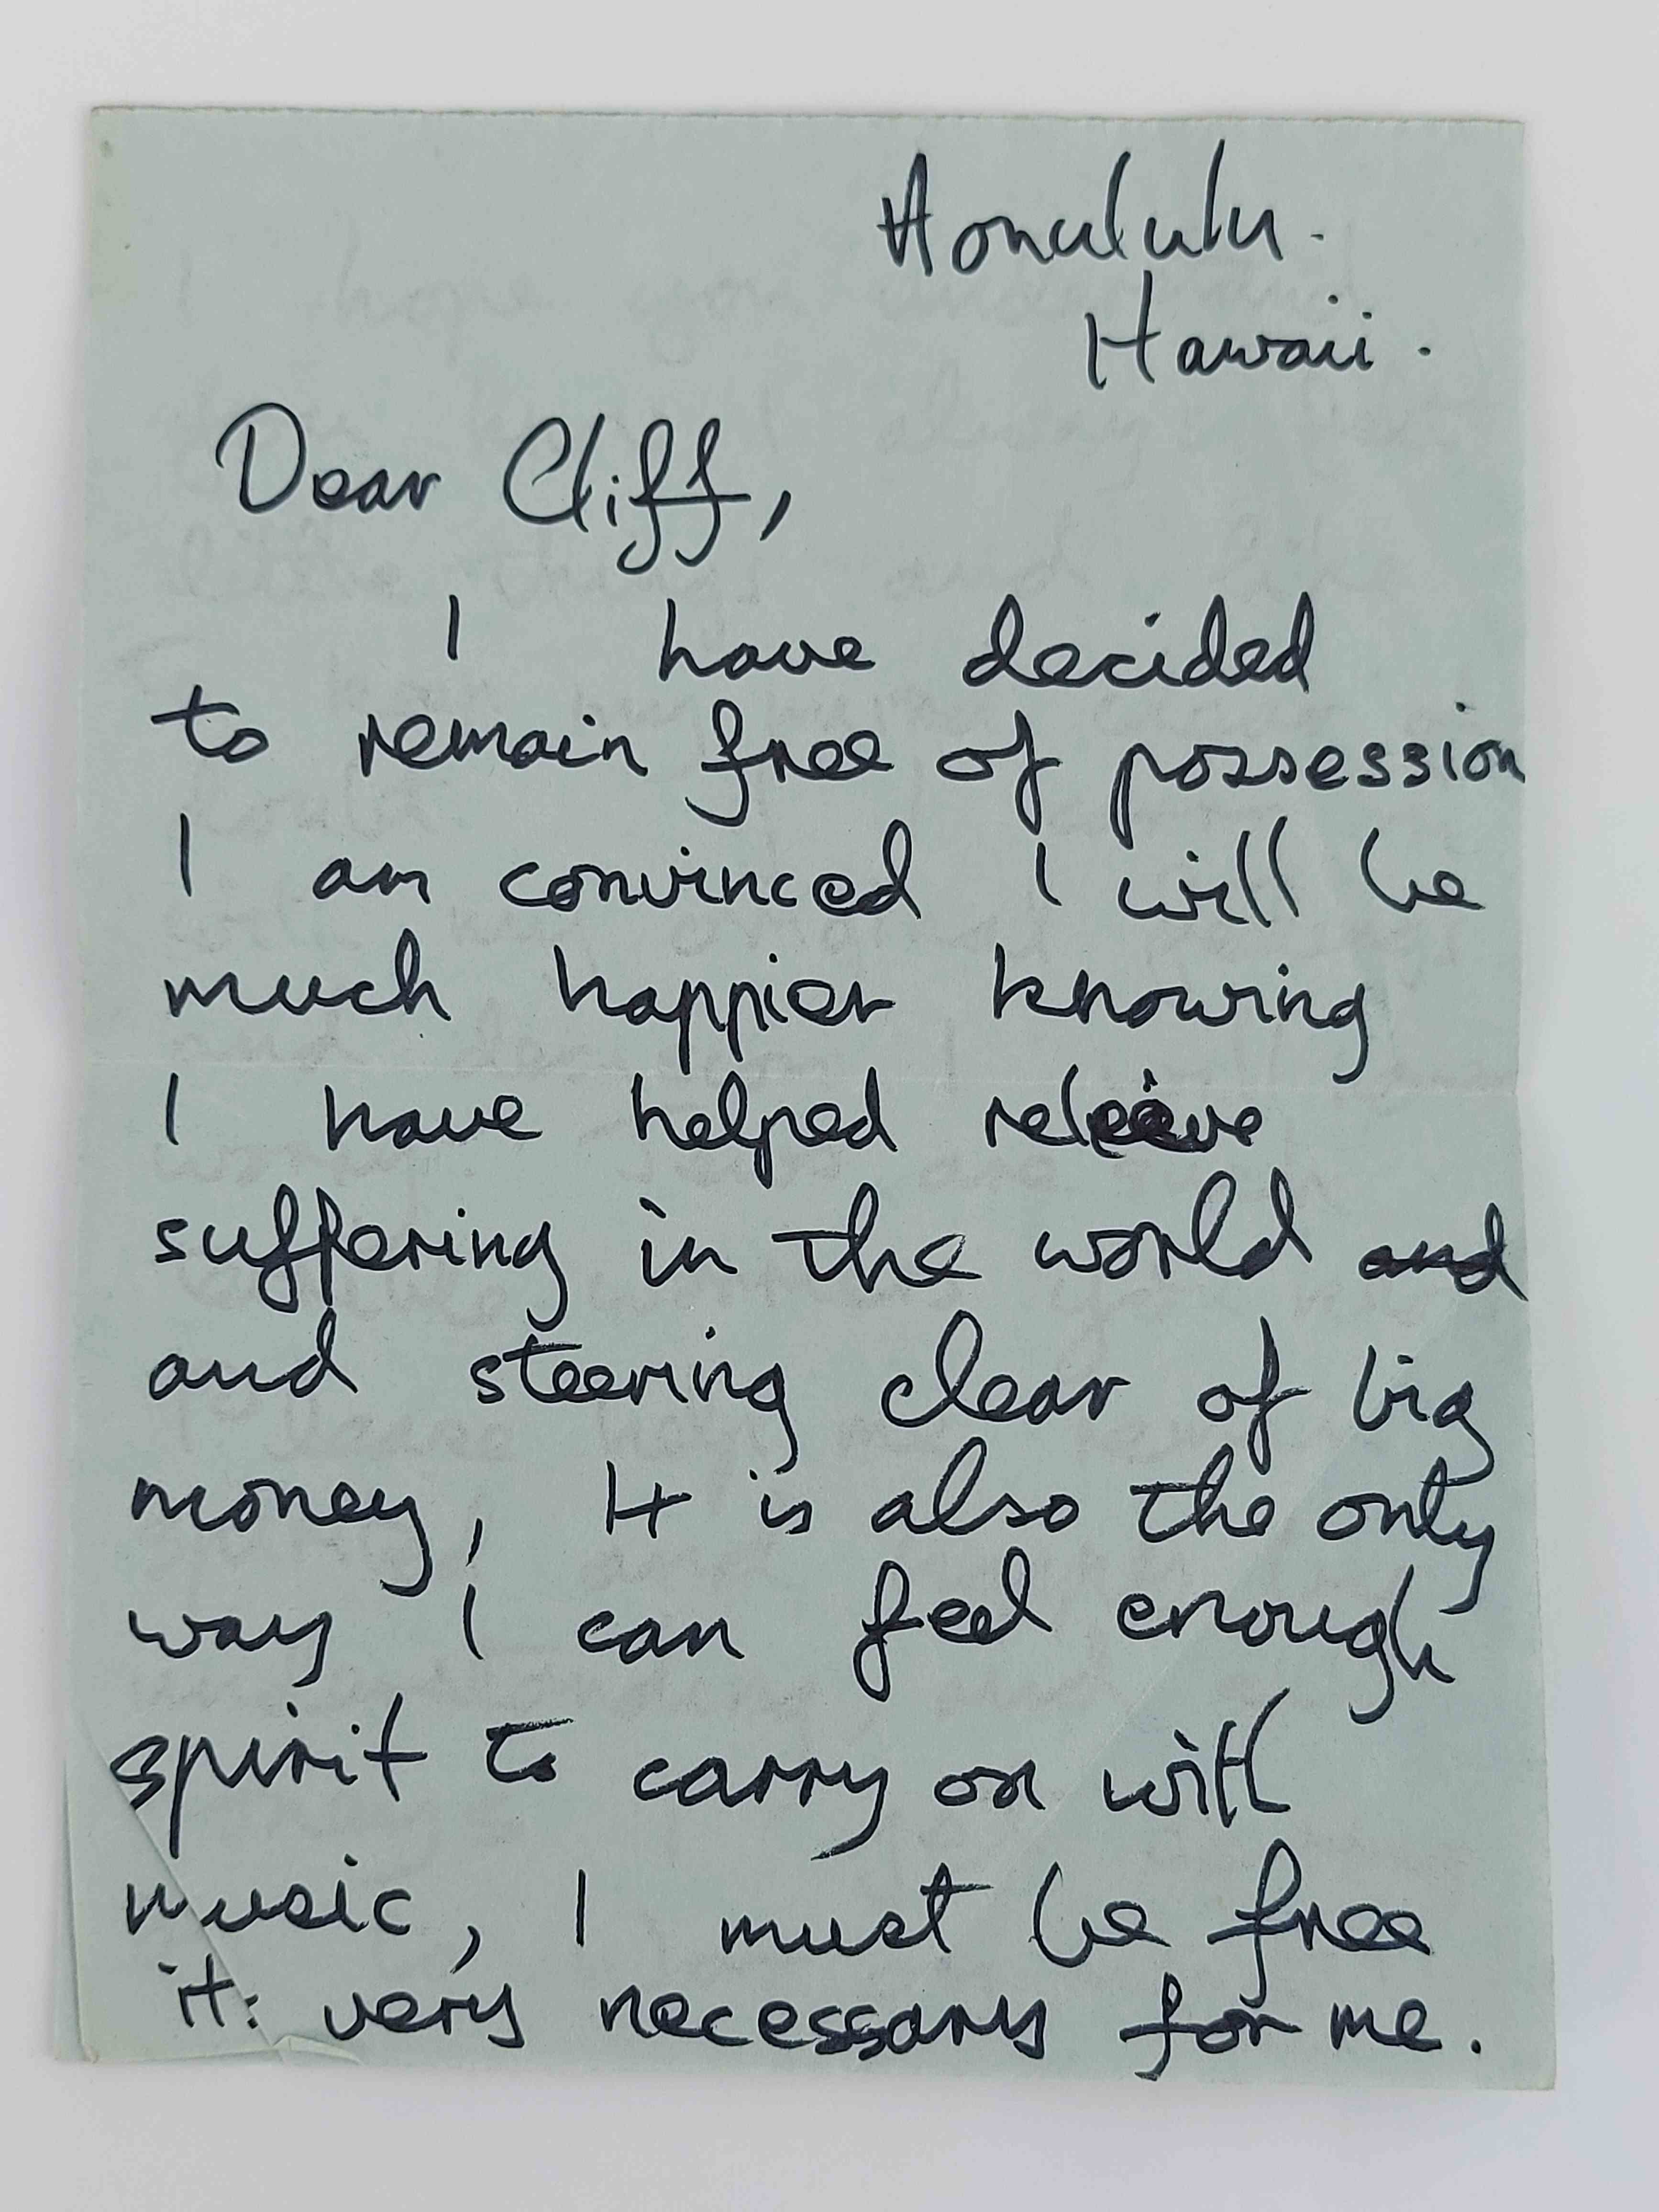 Peter Green's letter from Hawaii to Clifford Adams